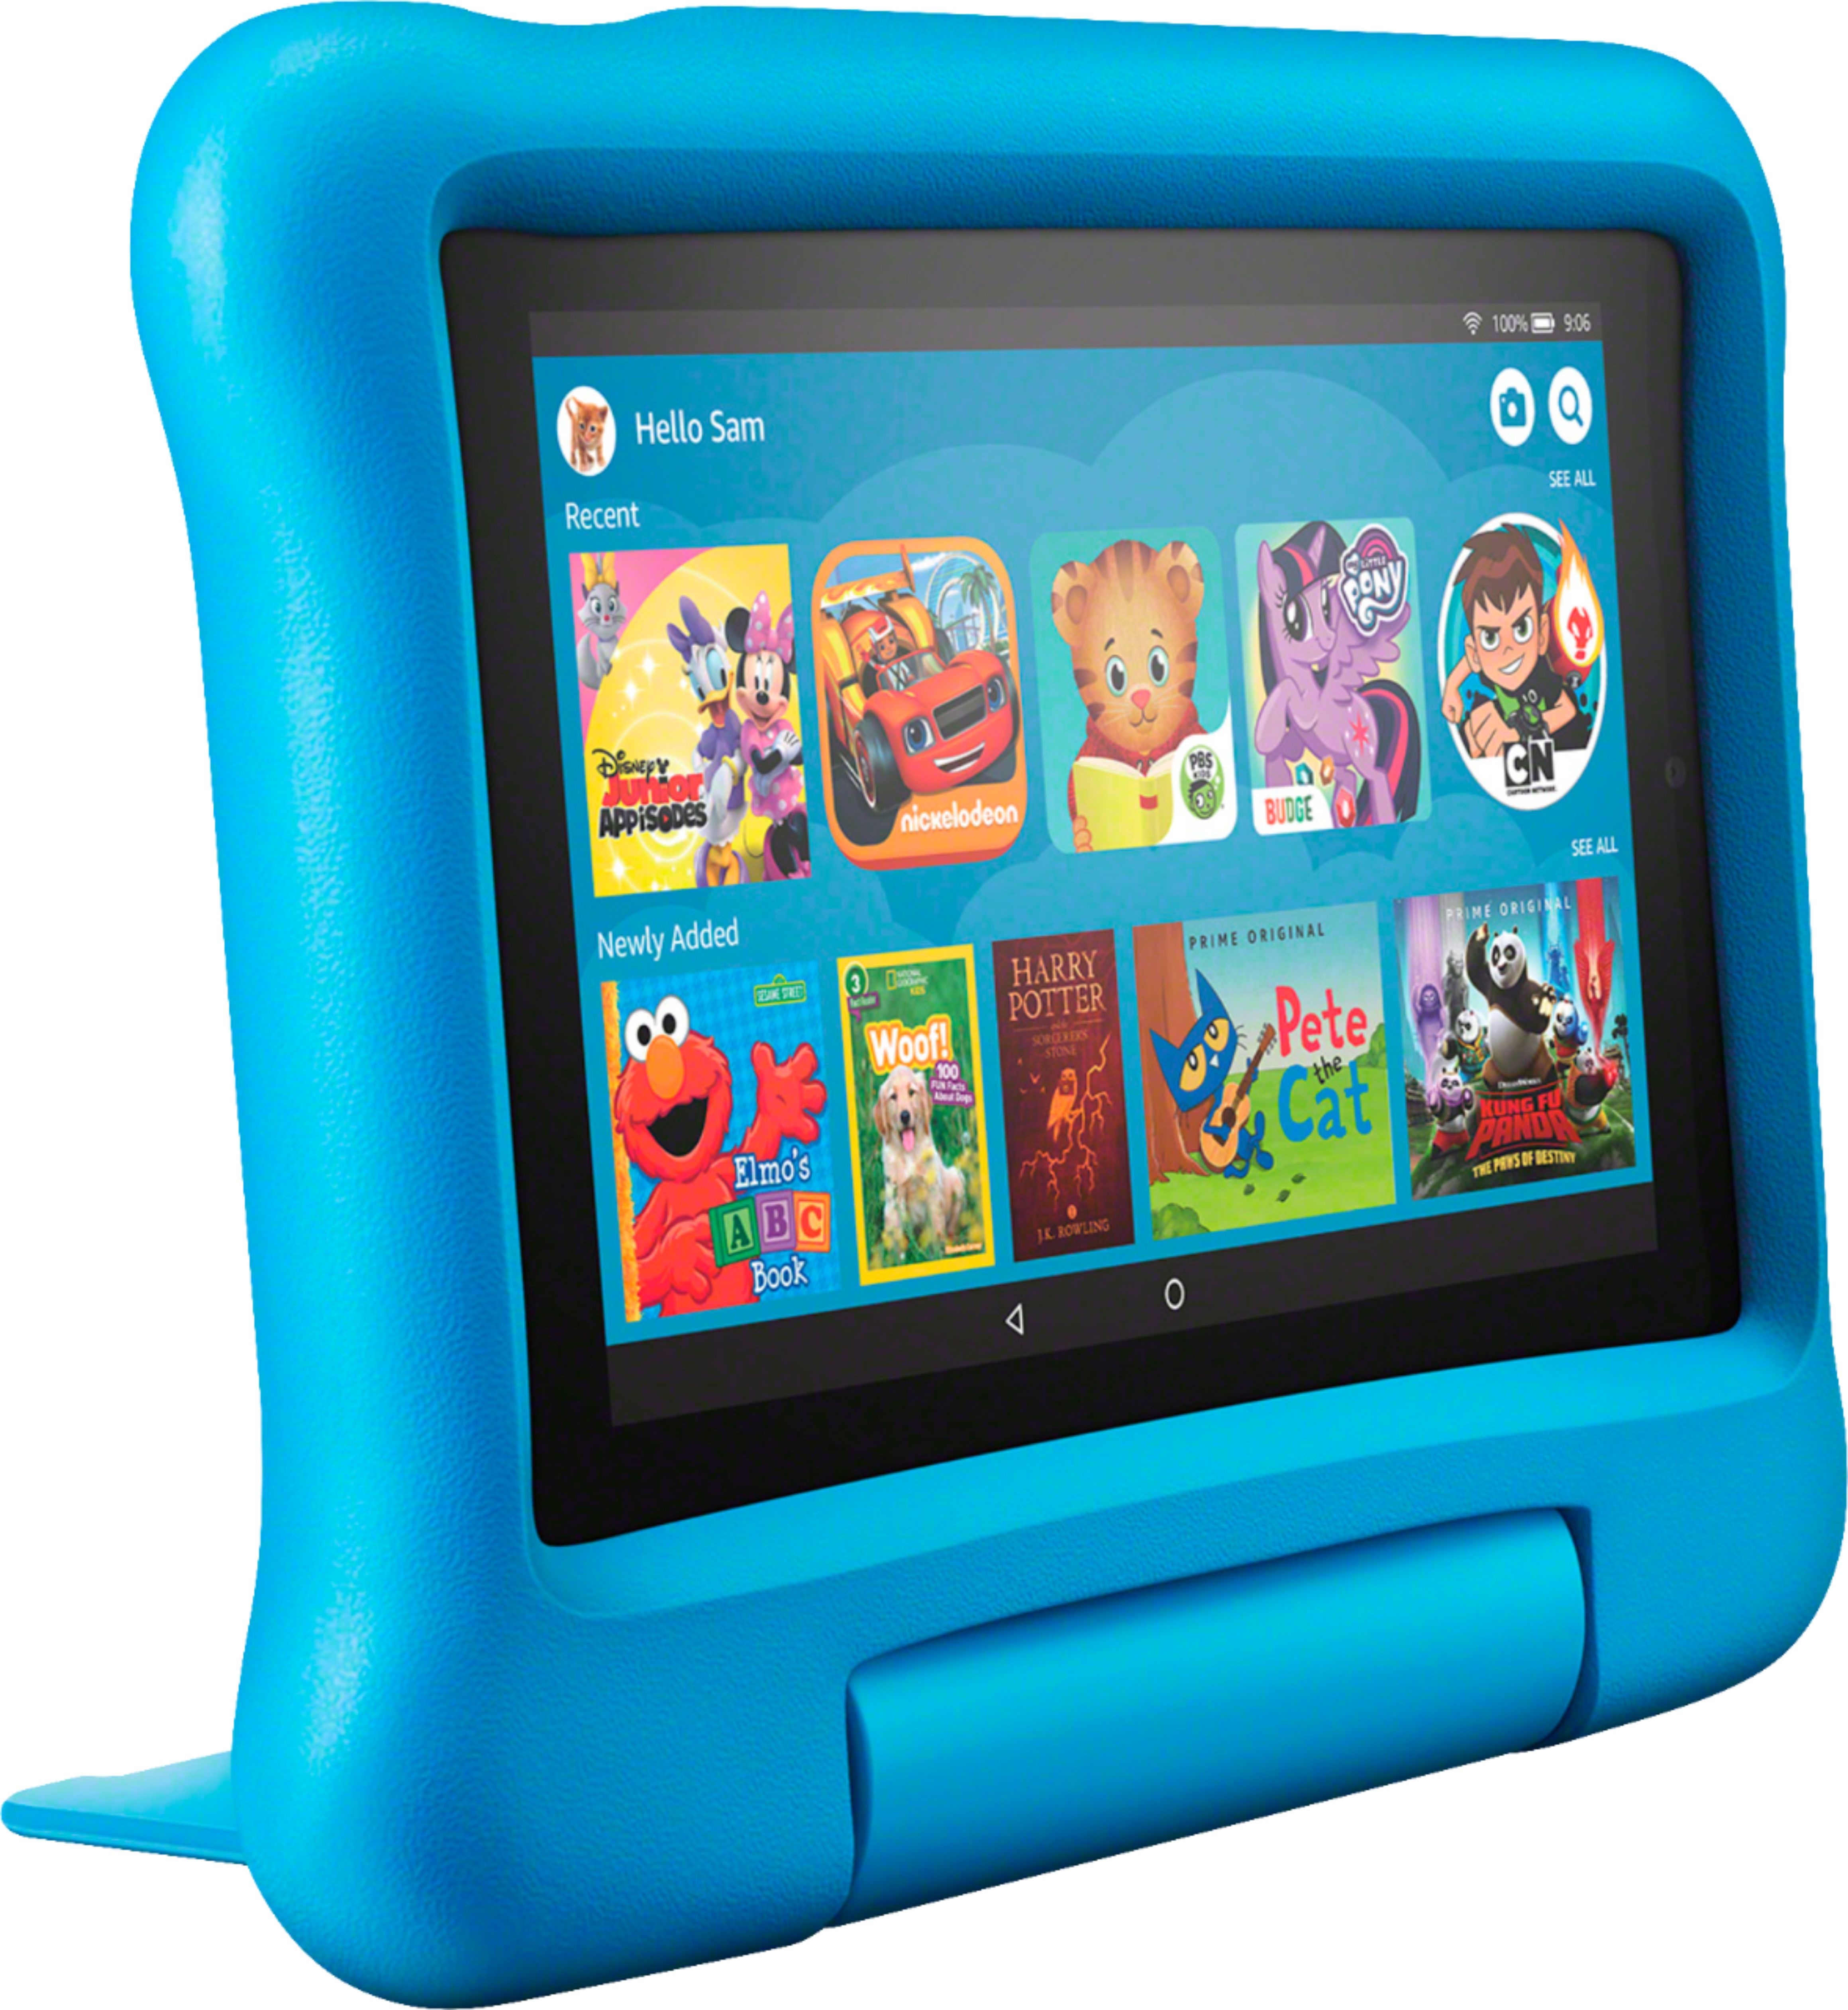 Questions And Answers Amazon Fire 7 Kids 7 Tablet Ages 3 7 16gb Blue